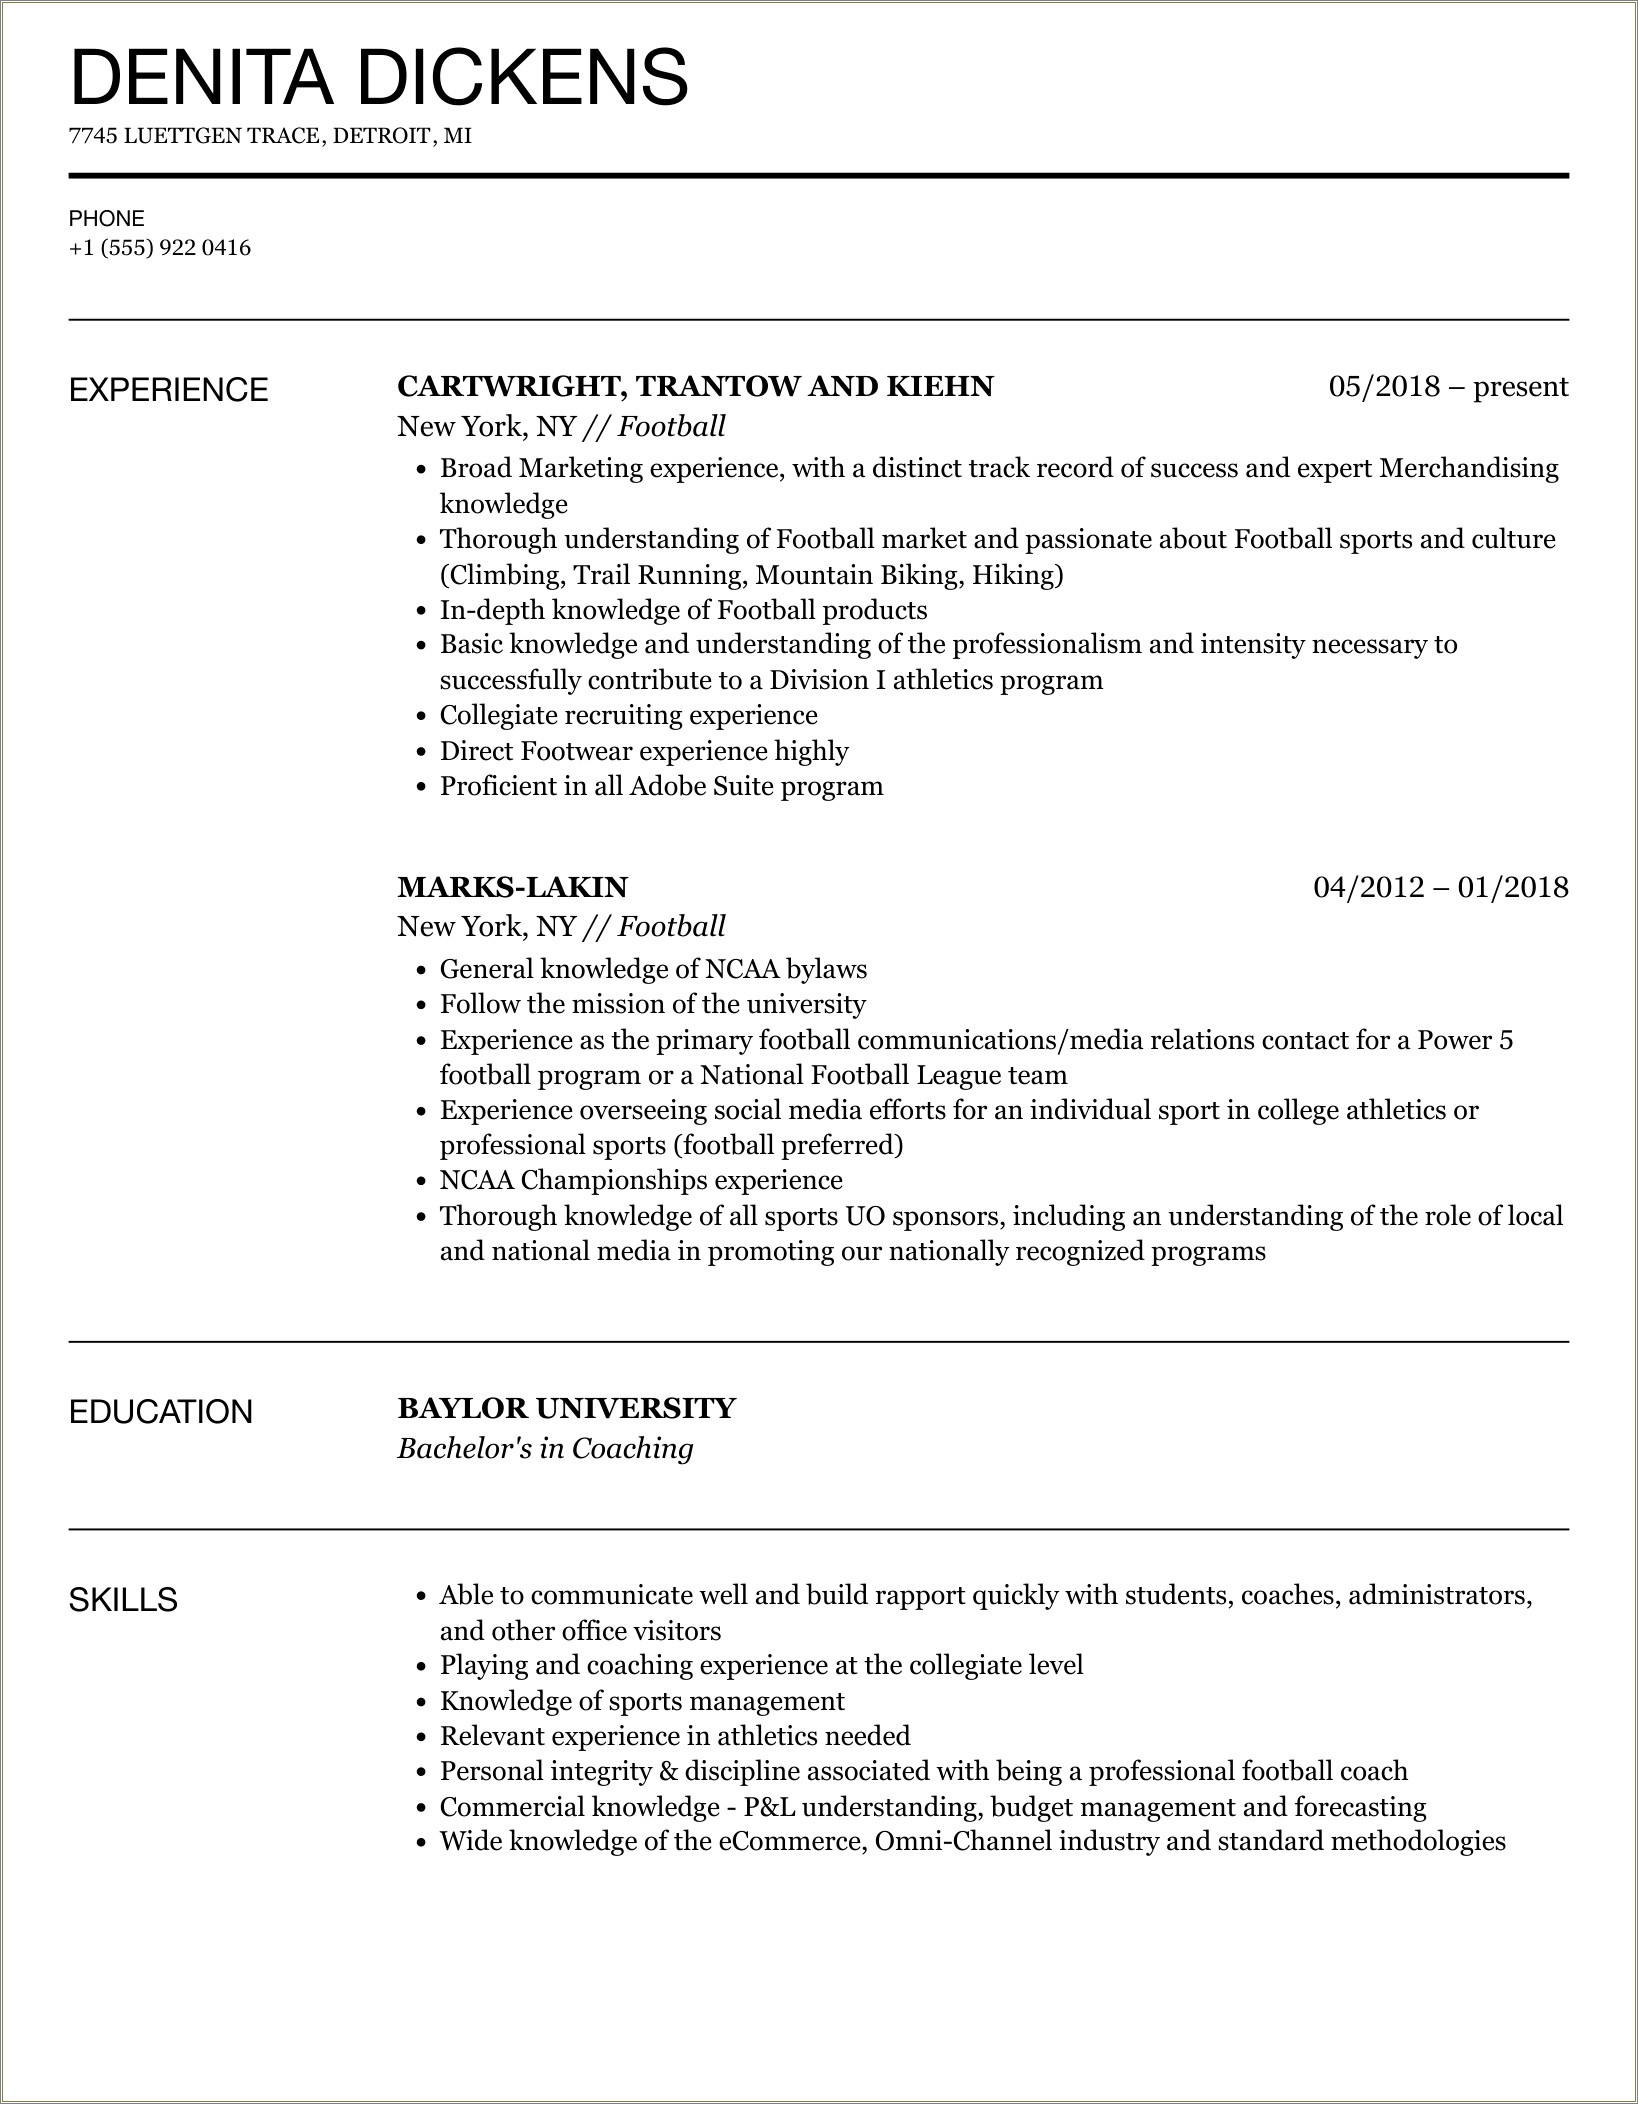 Resume For Soccer Coach As A Objective